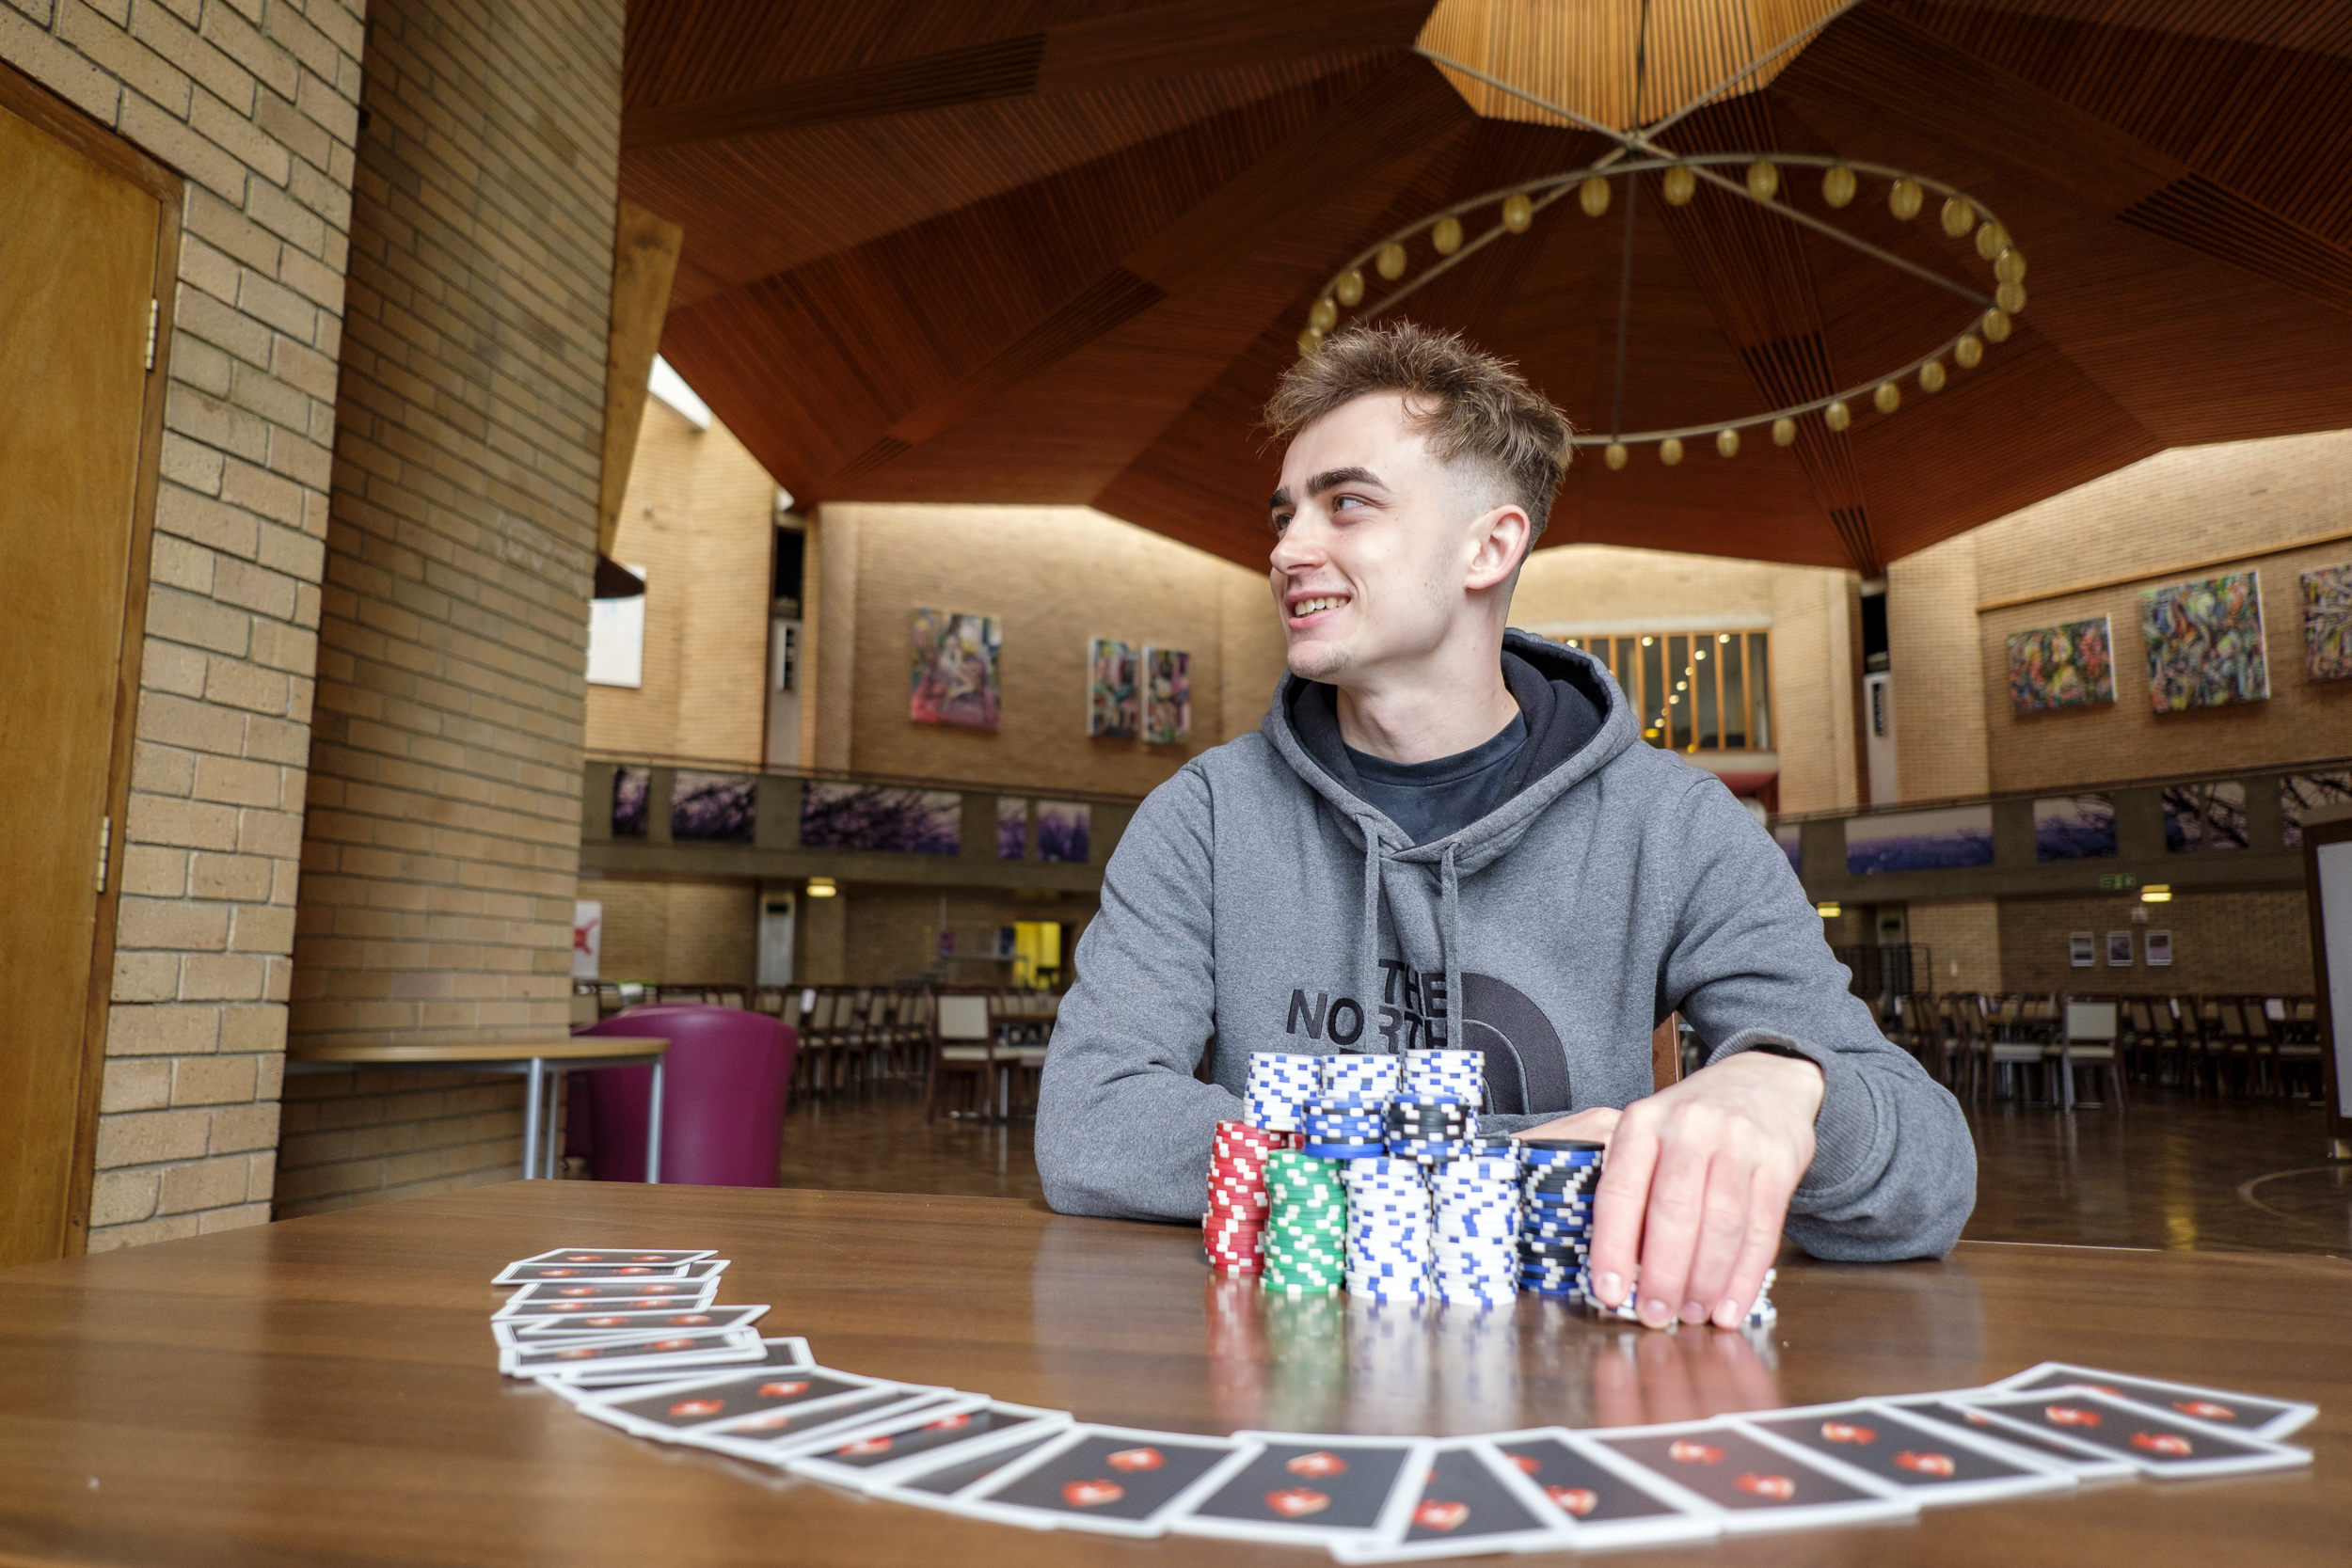 Student Lewis sat at table with playing cards and poker chips